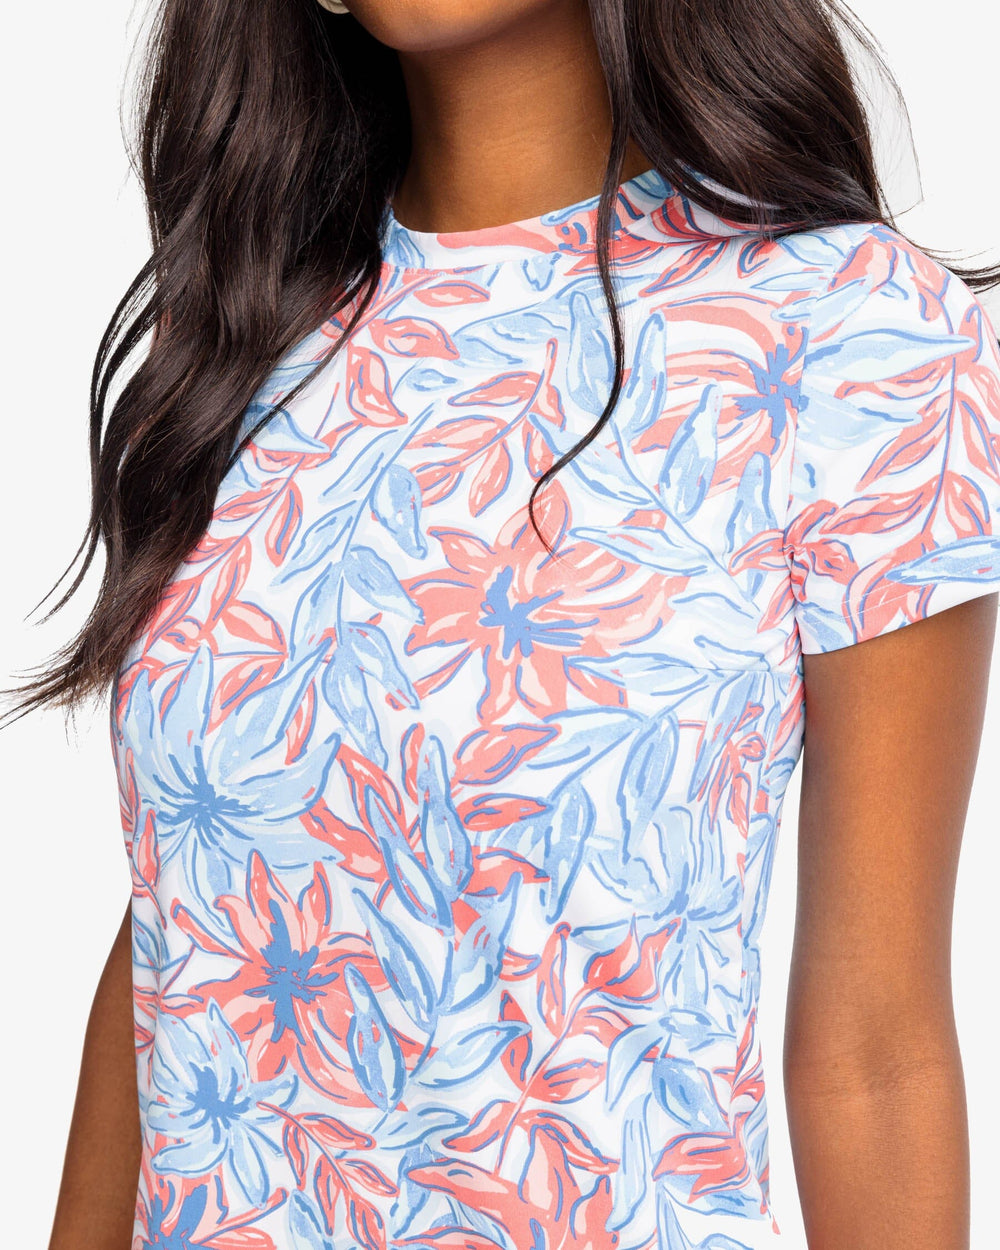 The detail view of the Southern Tide Chanelle TGIFloral Performance Dress by Southern Tide - Sunkist Coral